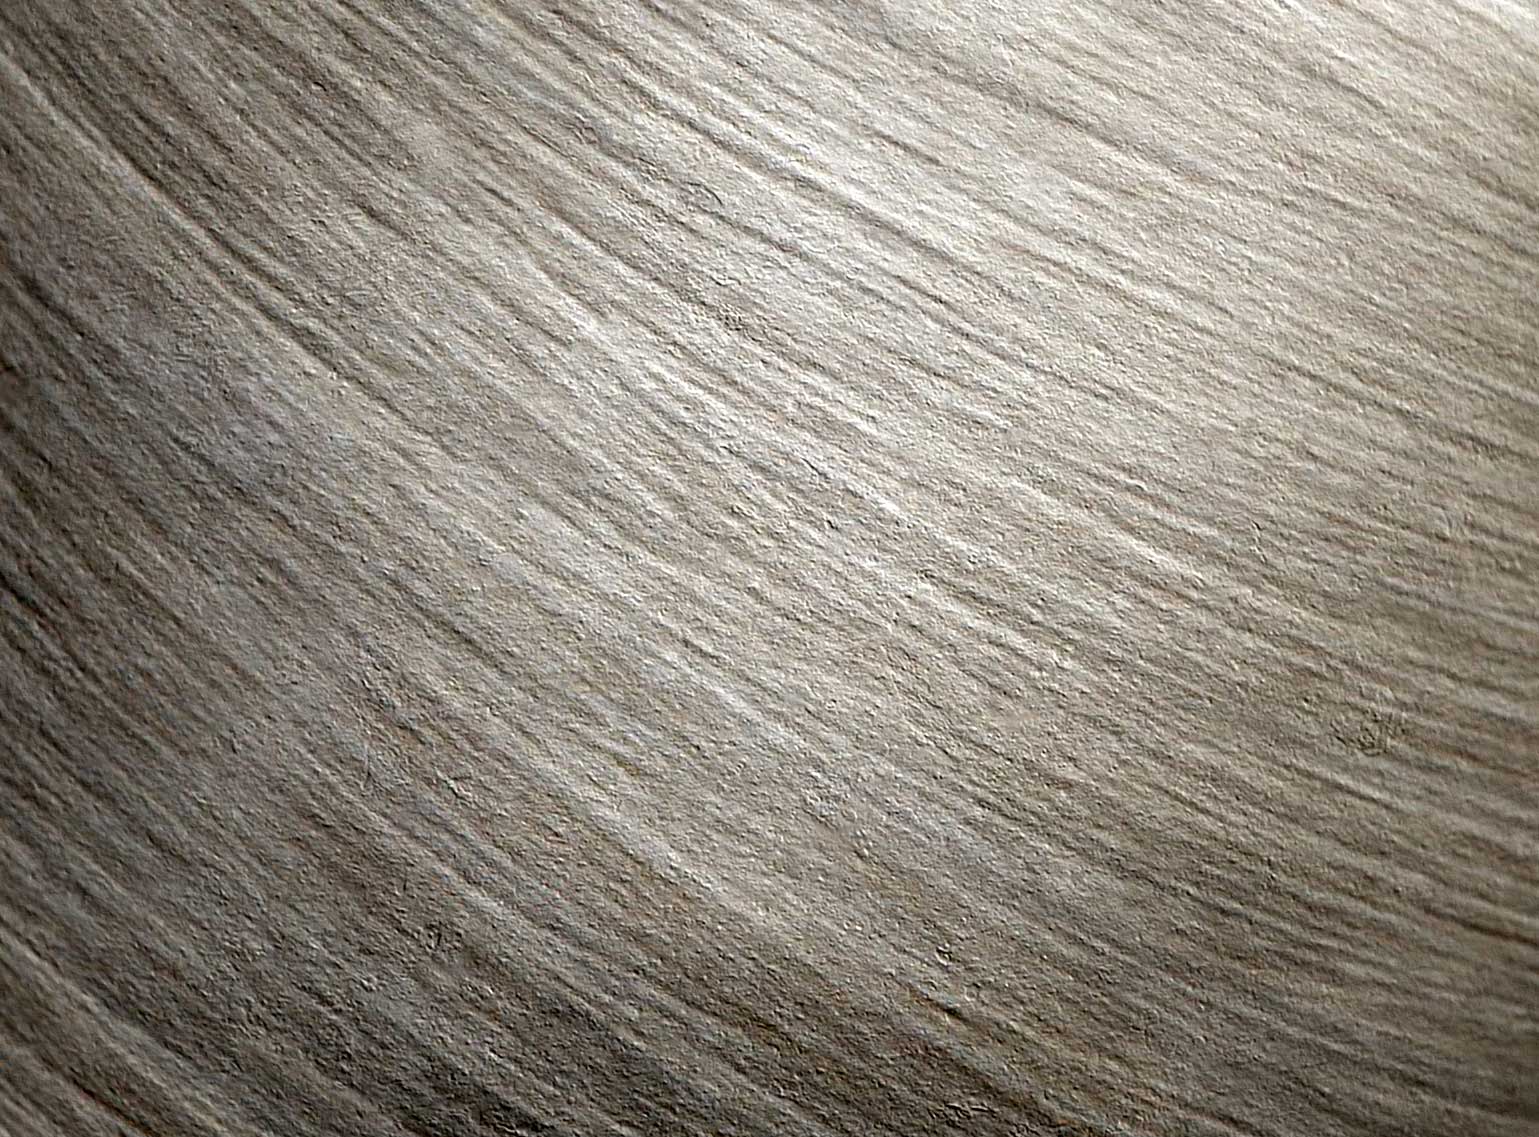 an image of a grey hair texture